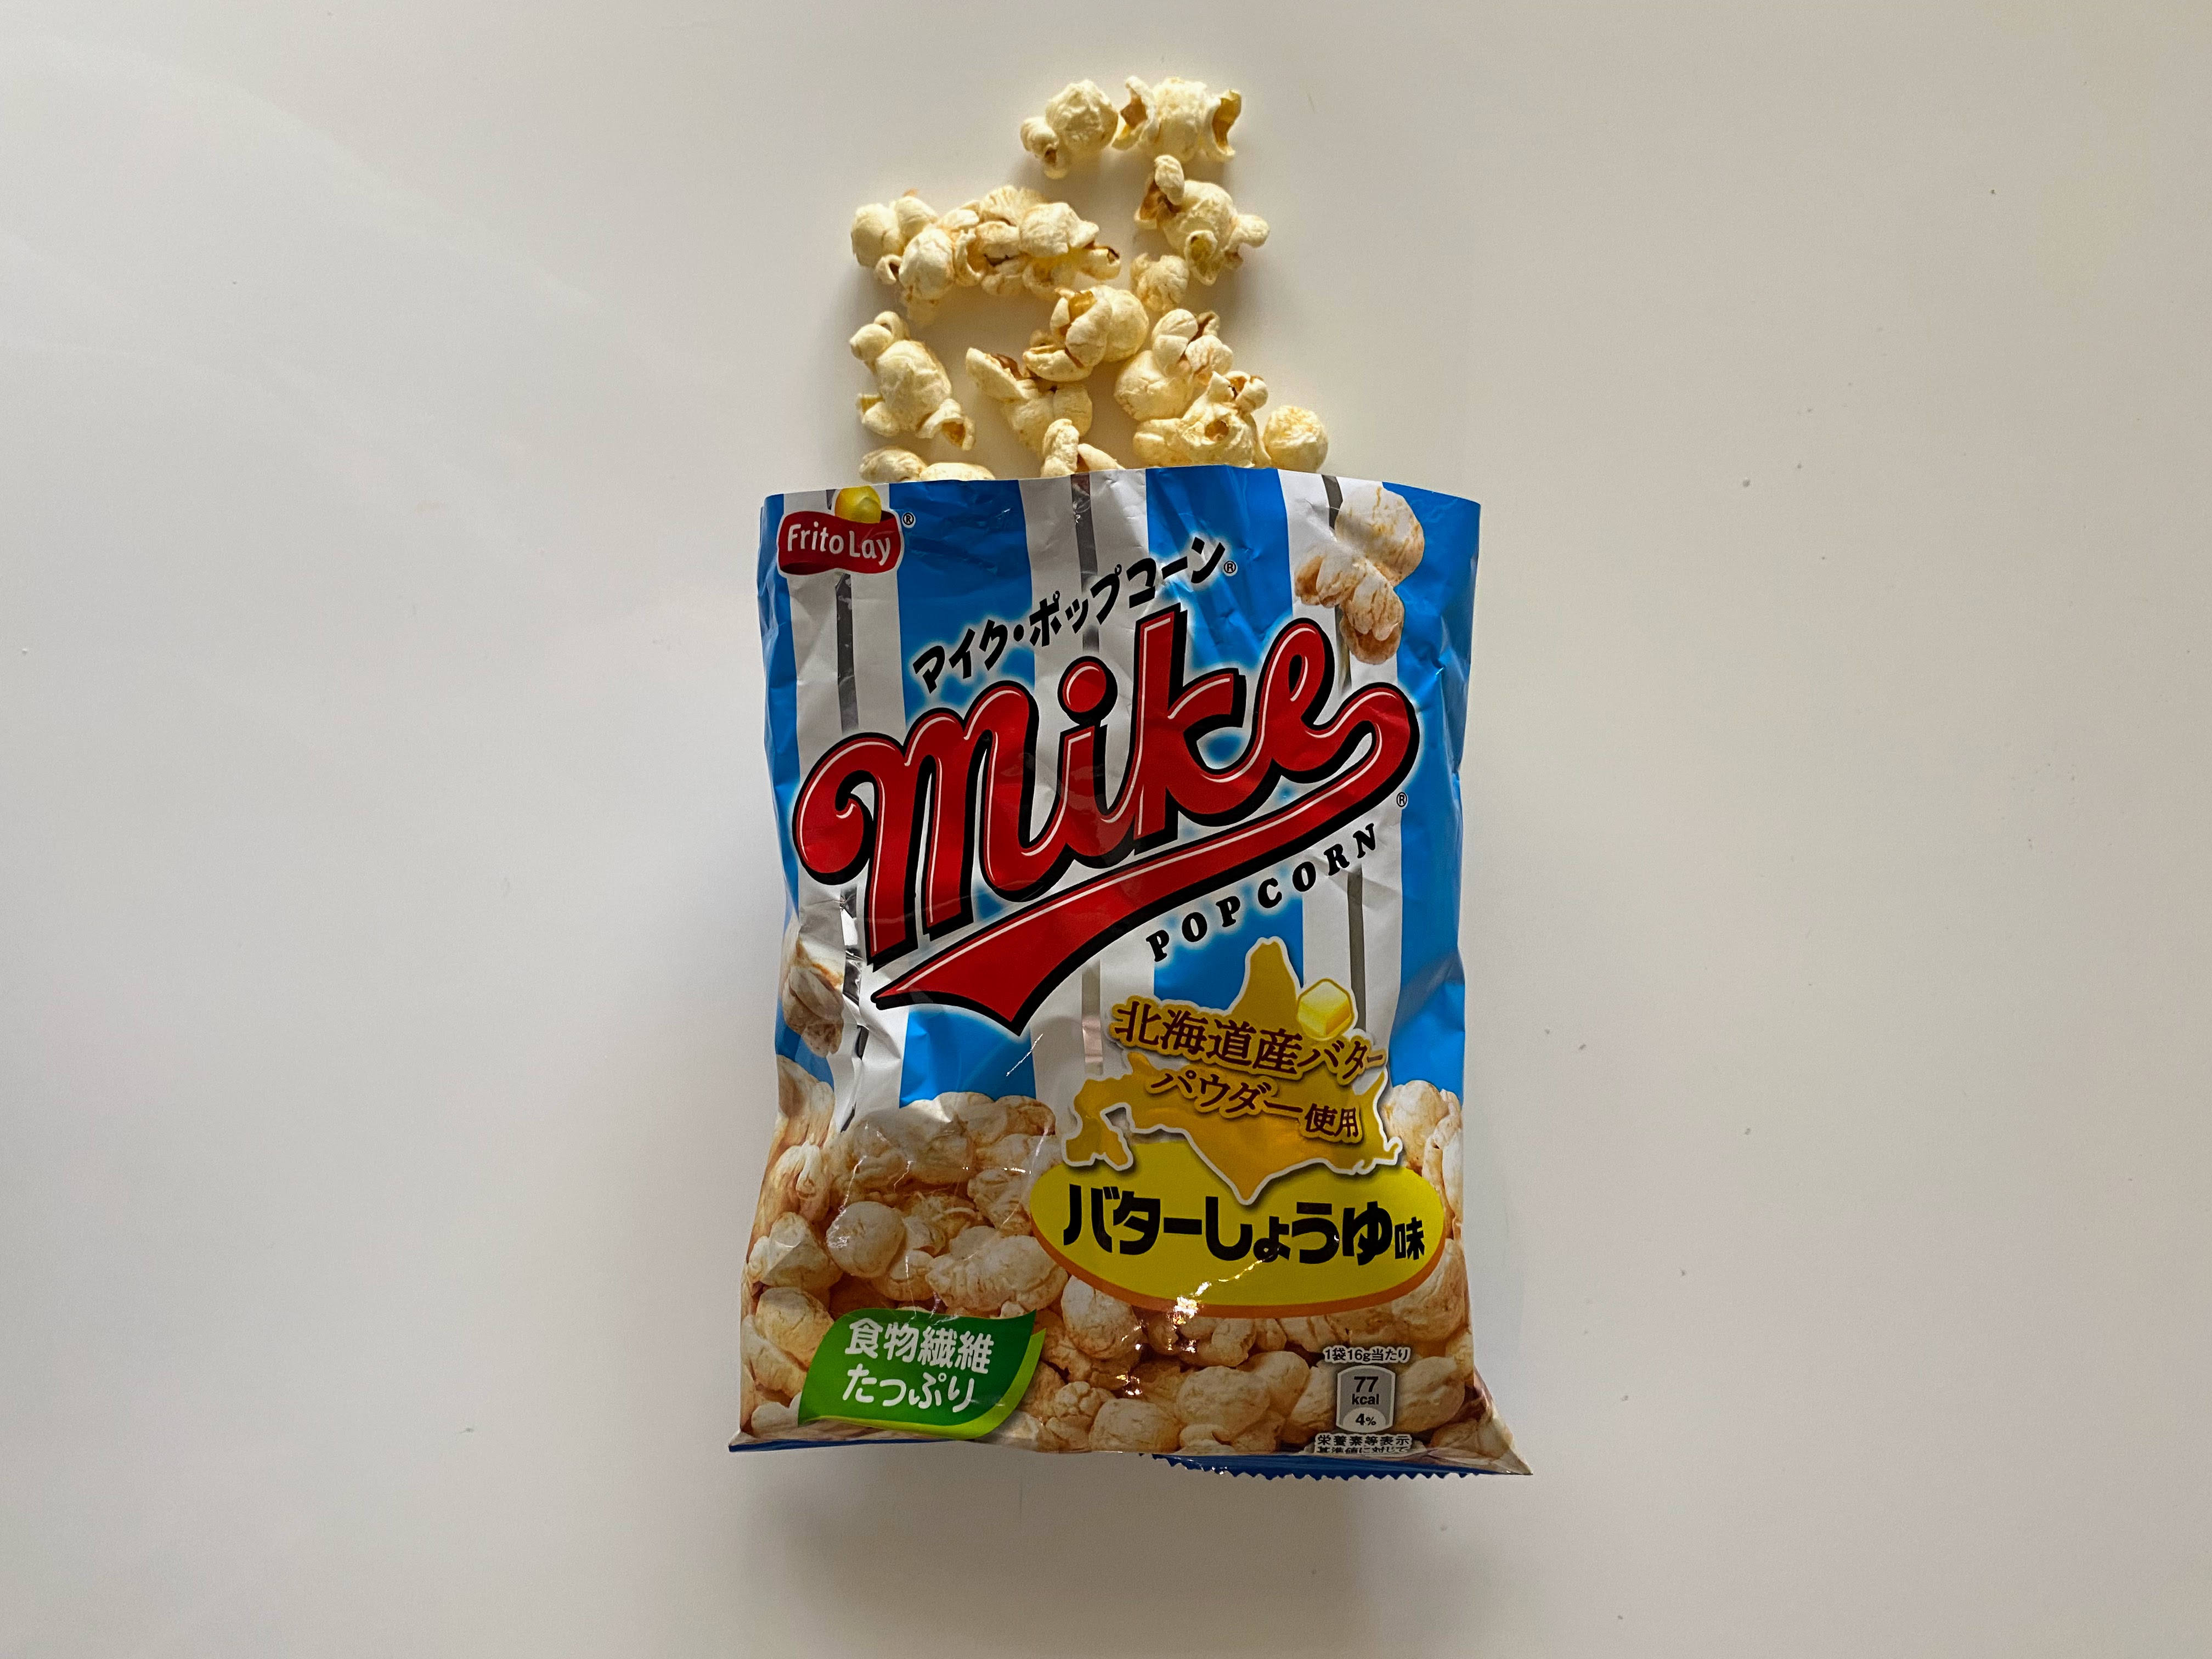 Mike popcorn opened from the Japan Crate July 2022